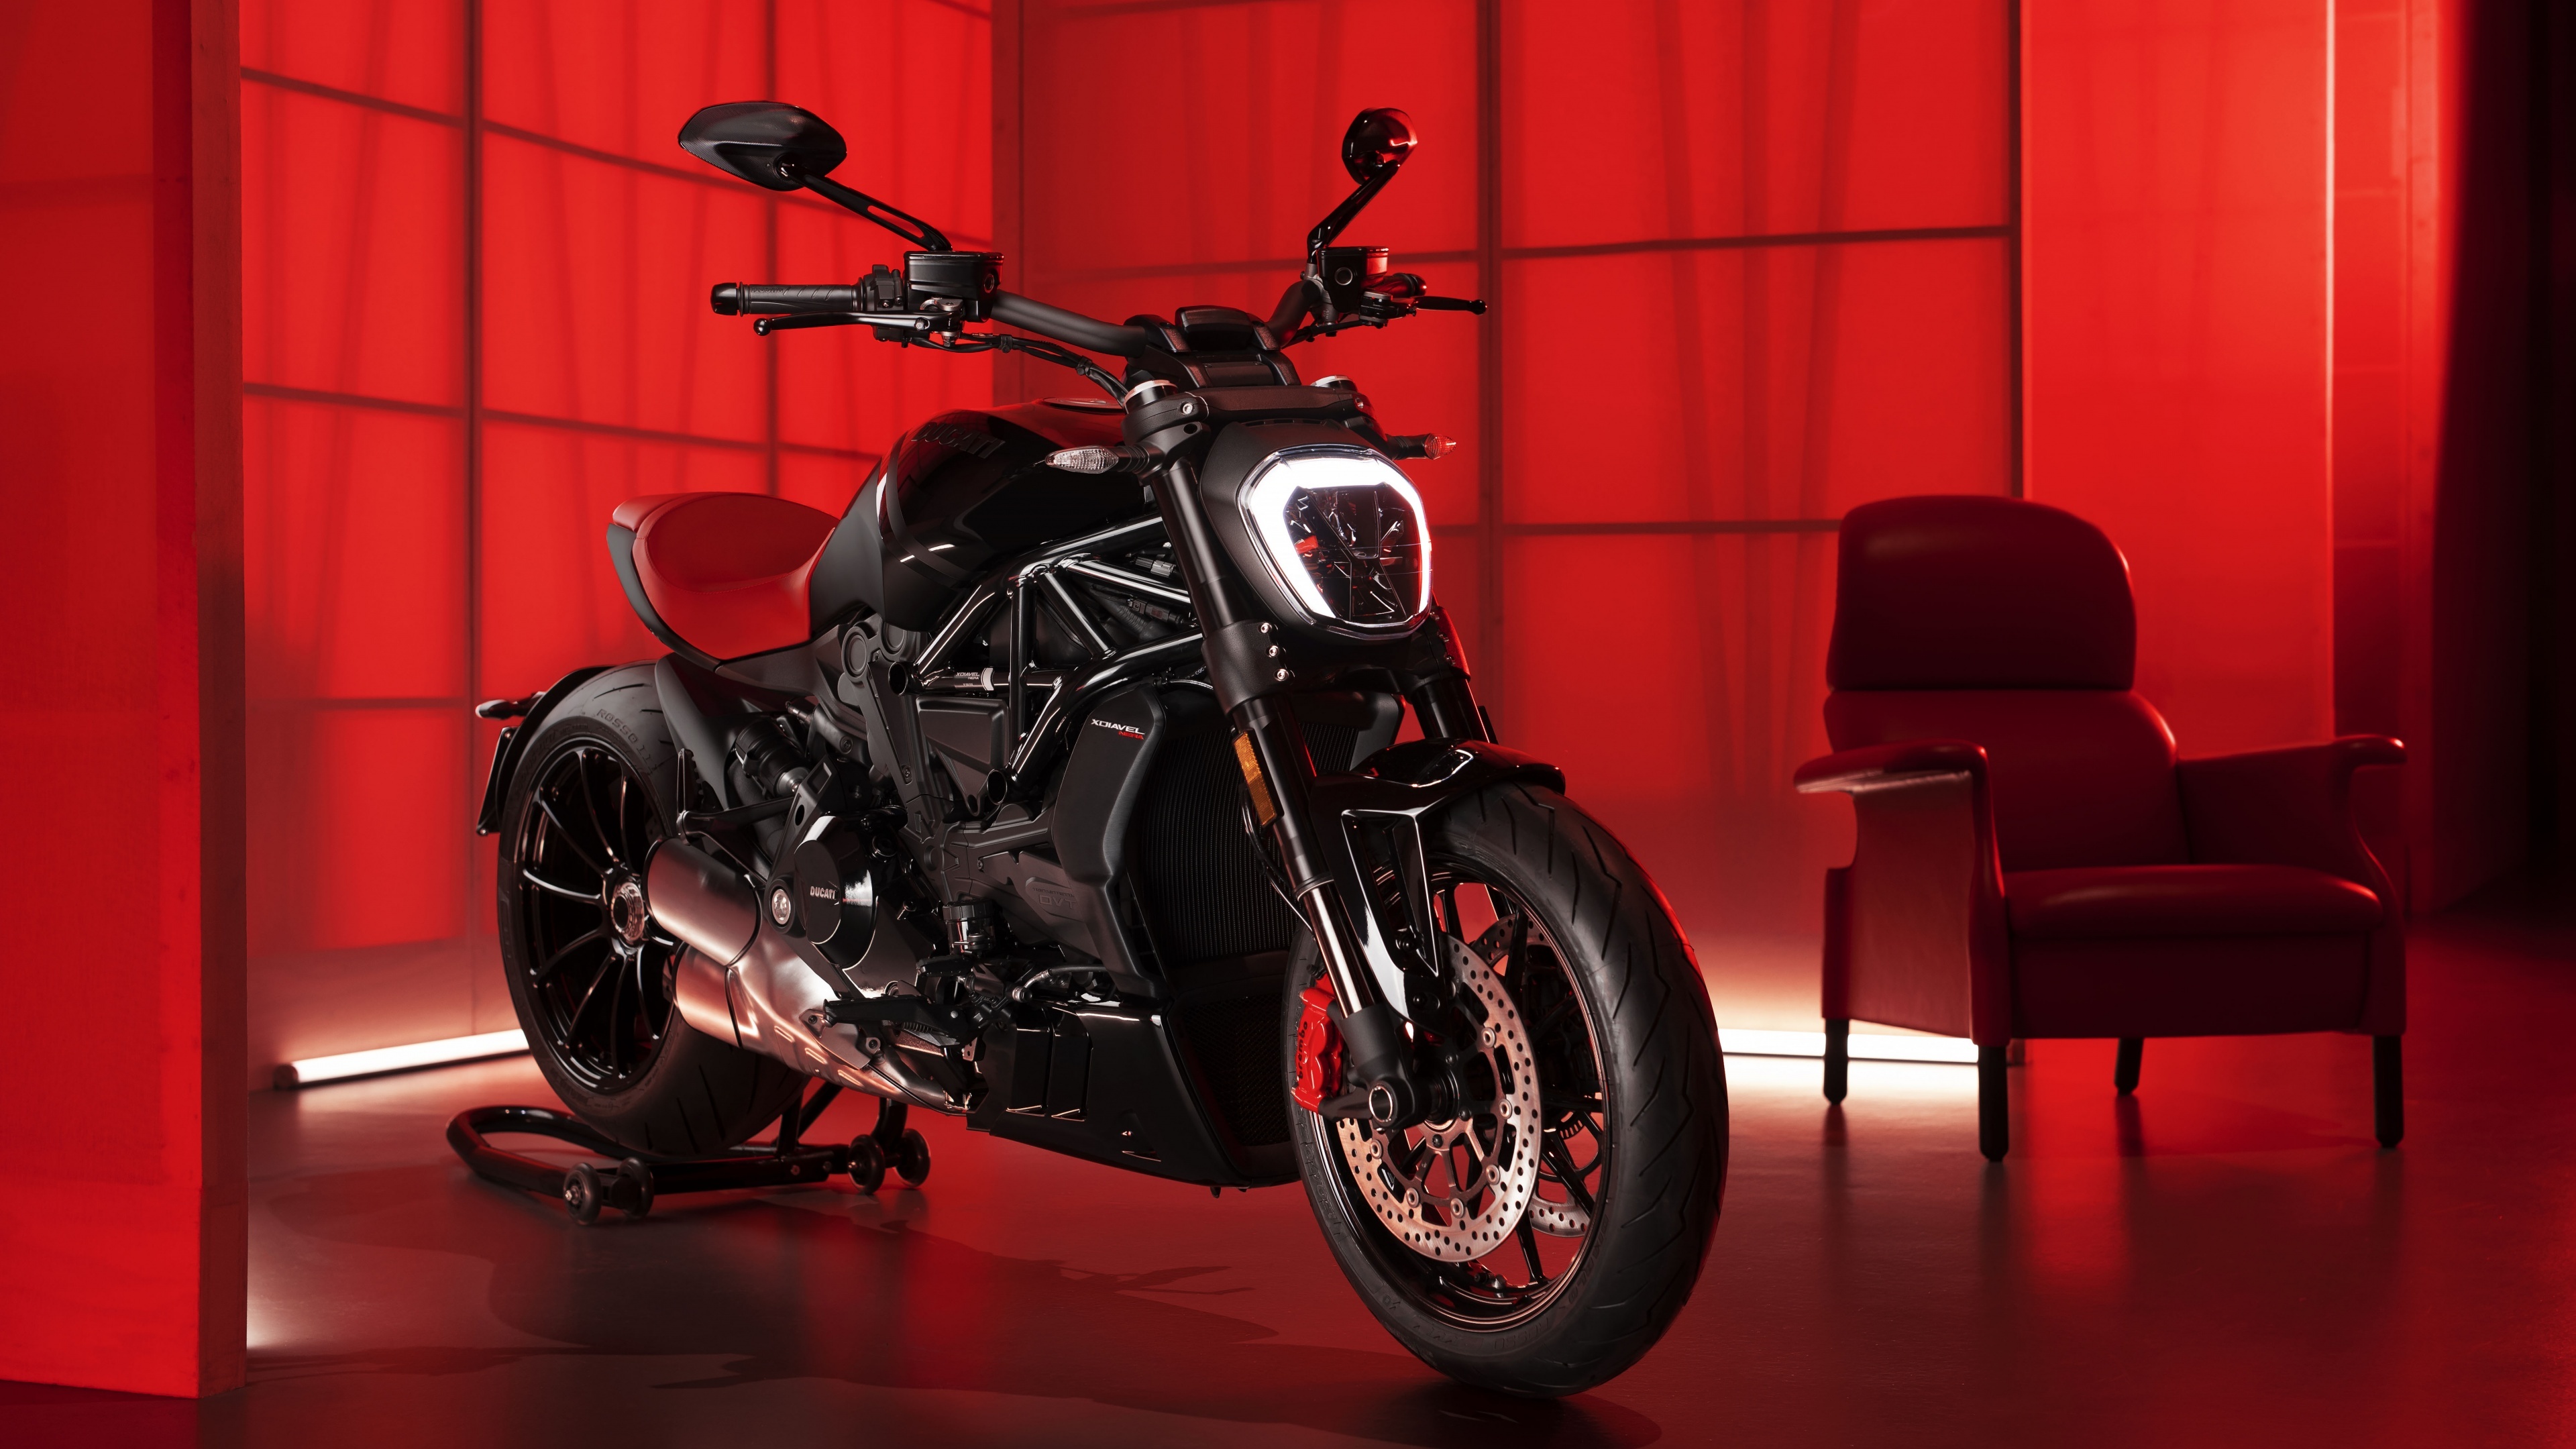 Ducati XDiavel, Limited edition, Sporty cruiser motorcycle, Red background, 3840x2160 4K Desktop